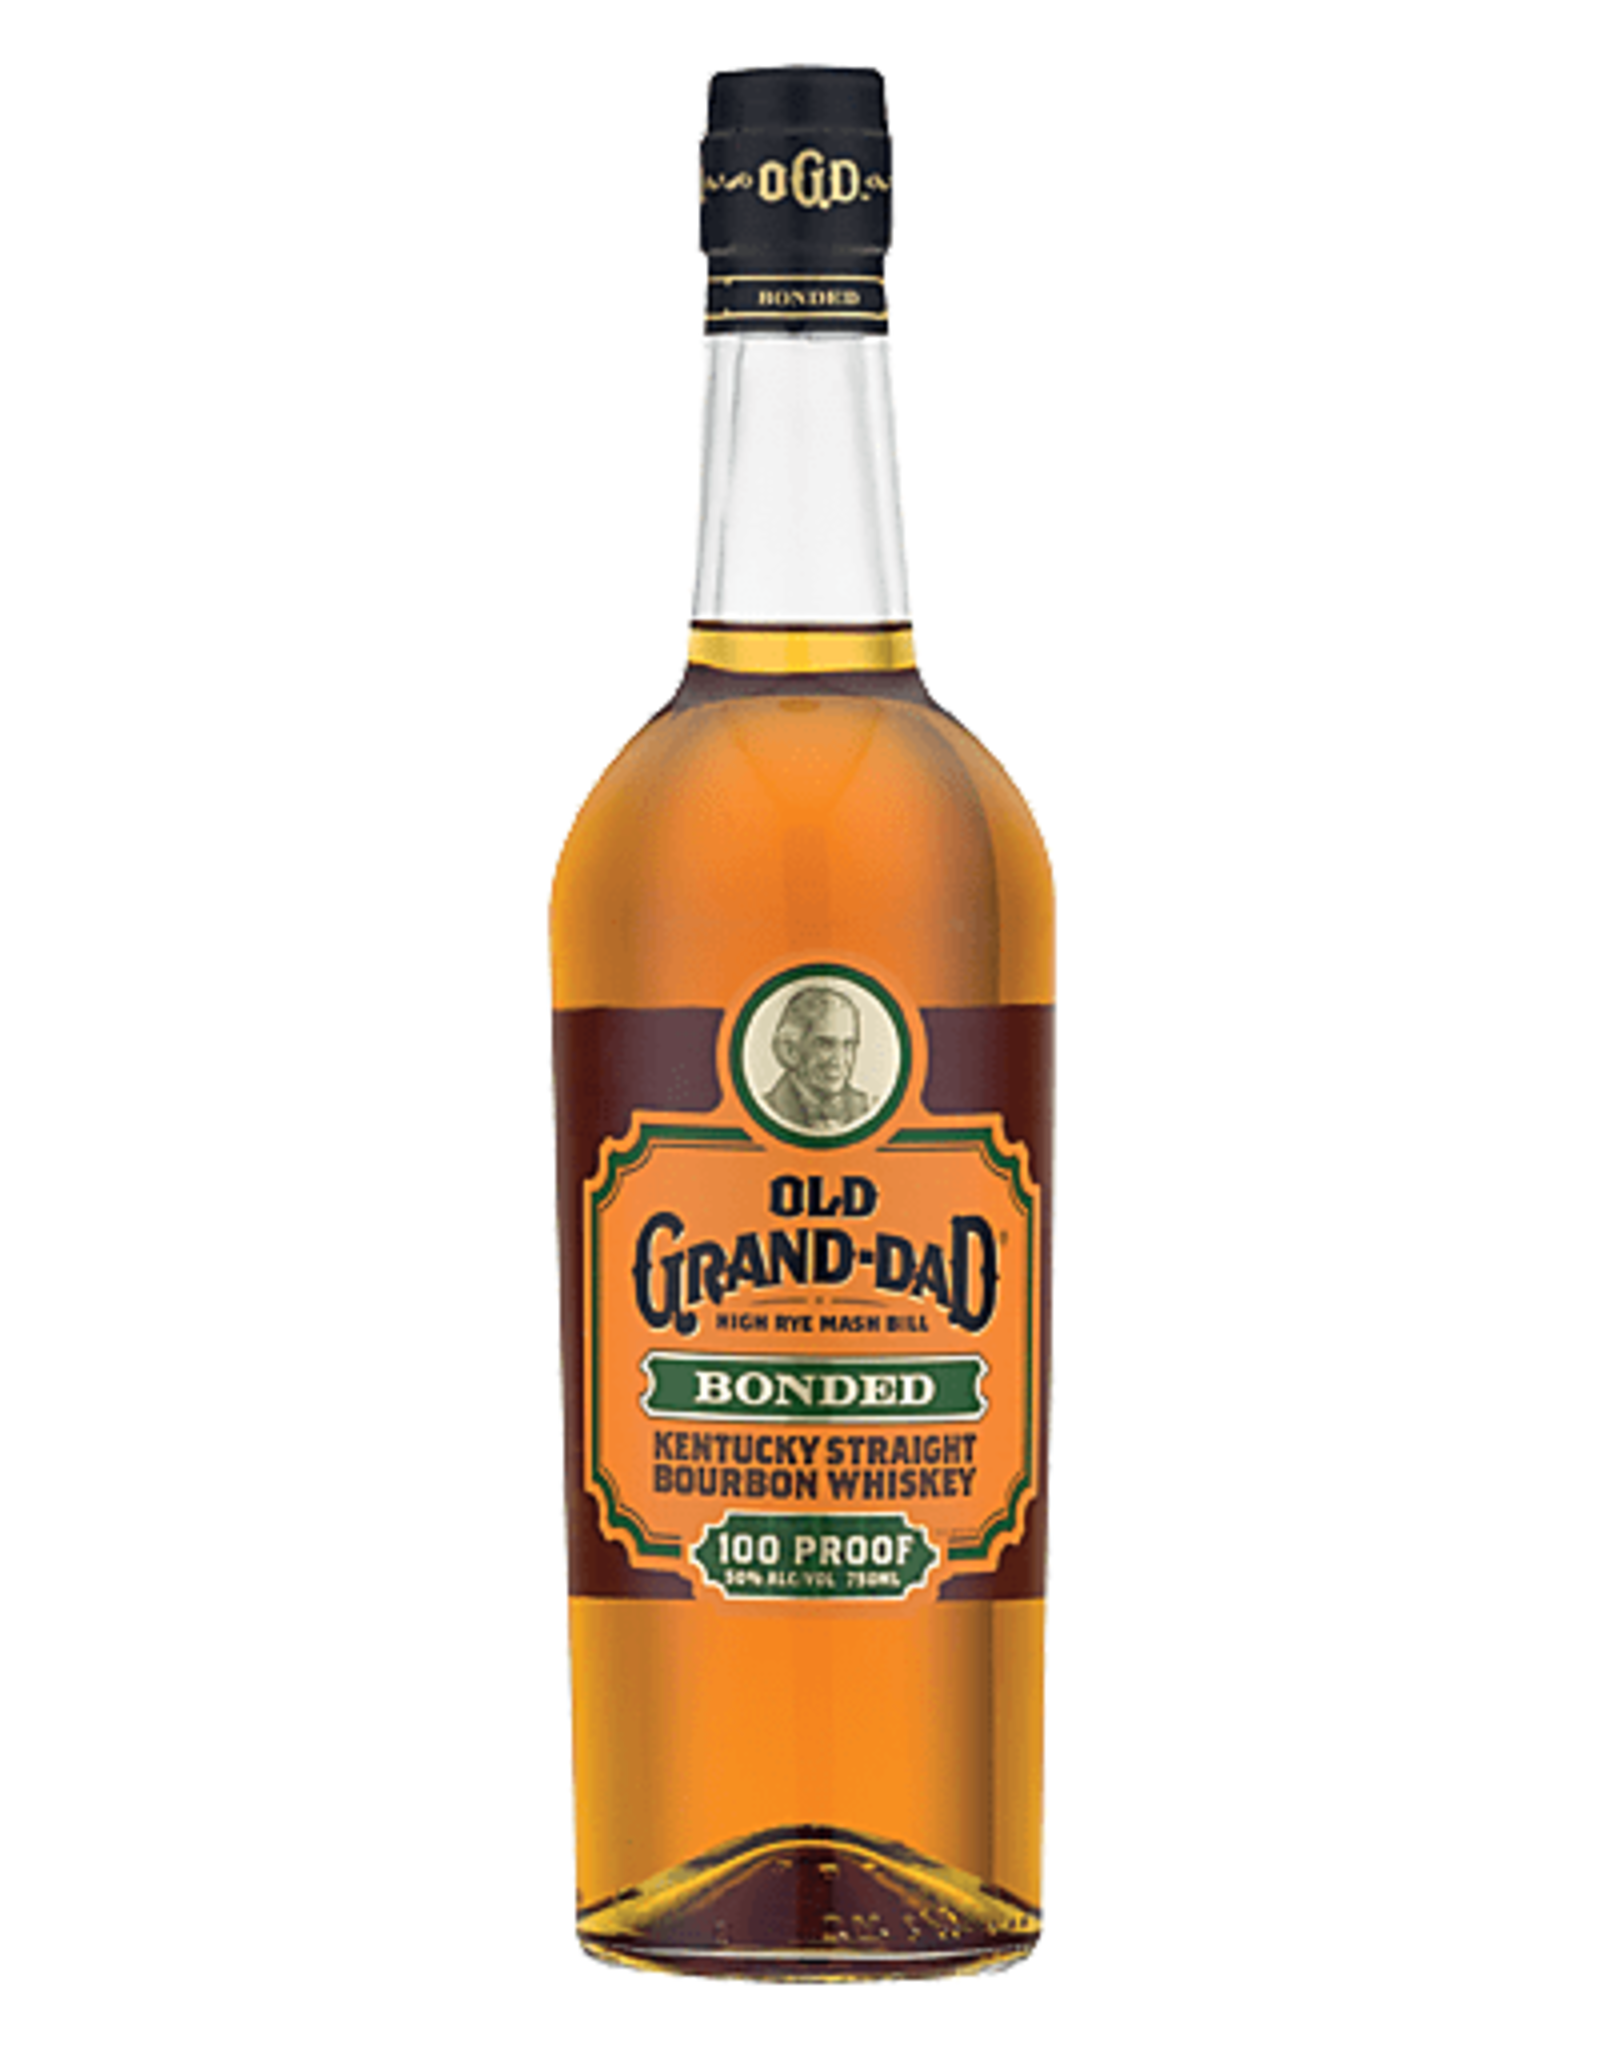 Old Grand-Dad Bonded Kentucky Bourbon Whiskey